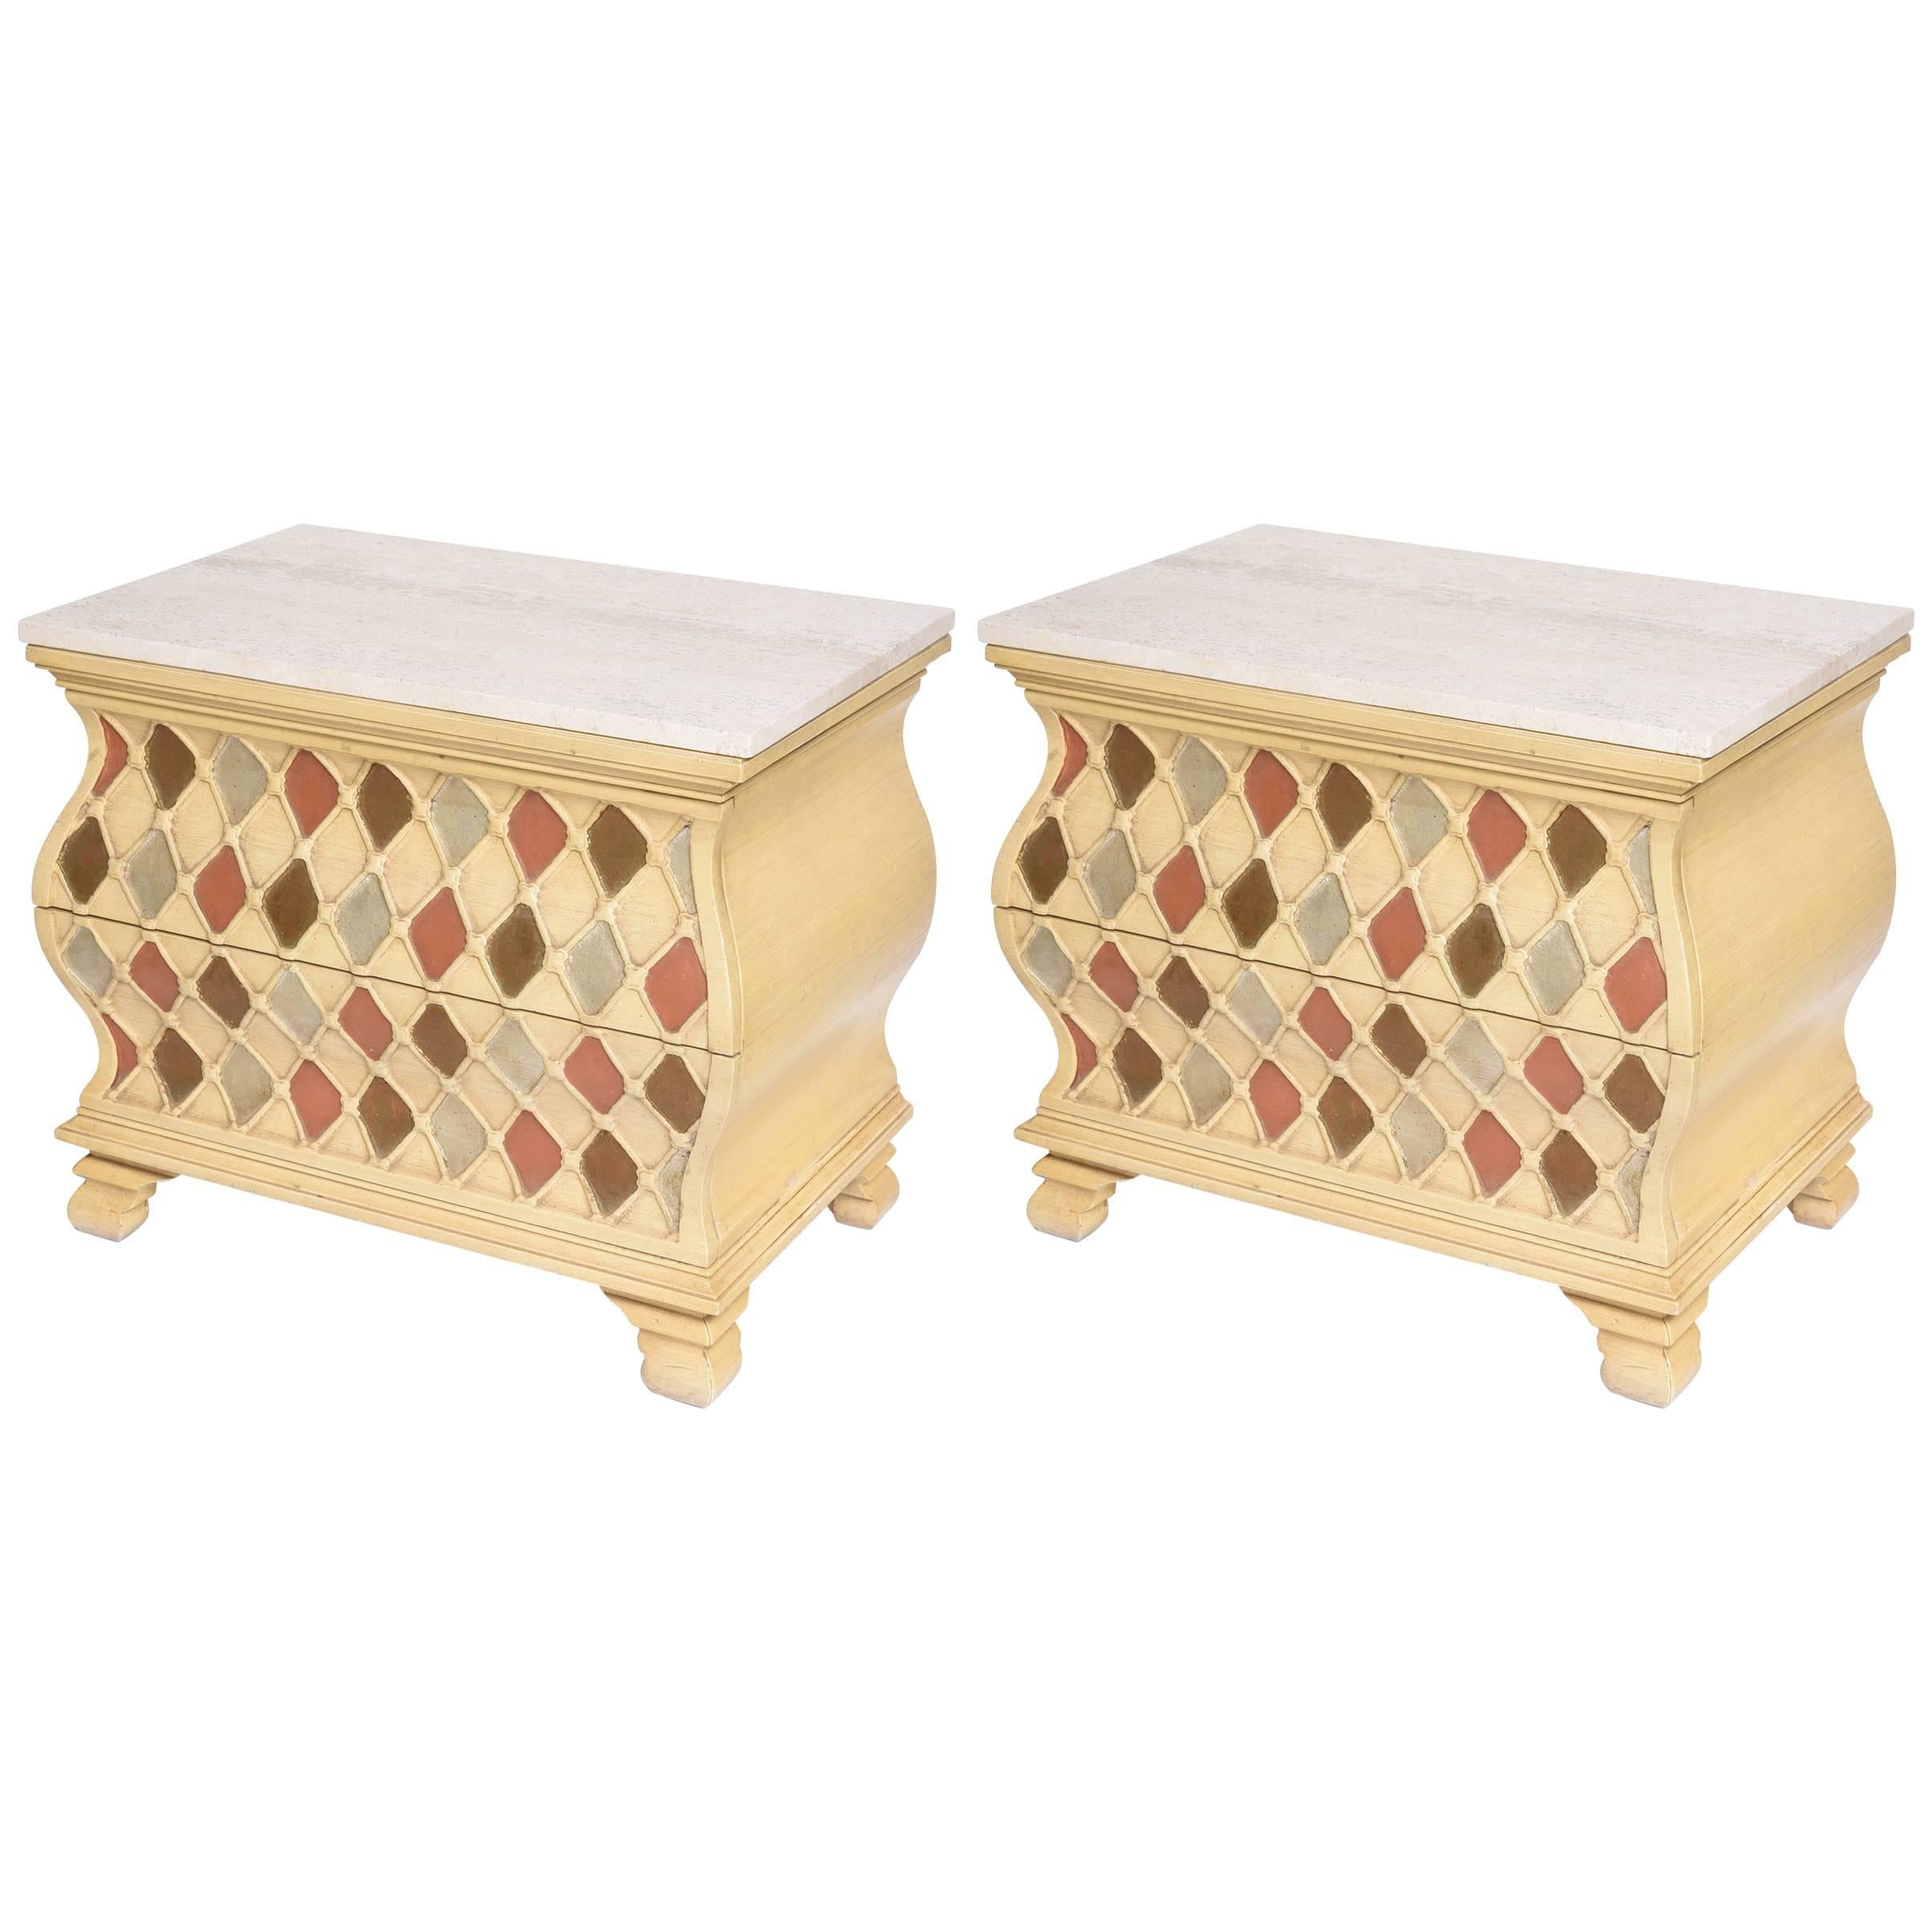 SALE! SALE! SALE! Pair of "Harlequin" Bombay Chests, Travertine Tops STUNNING For Sale